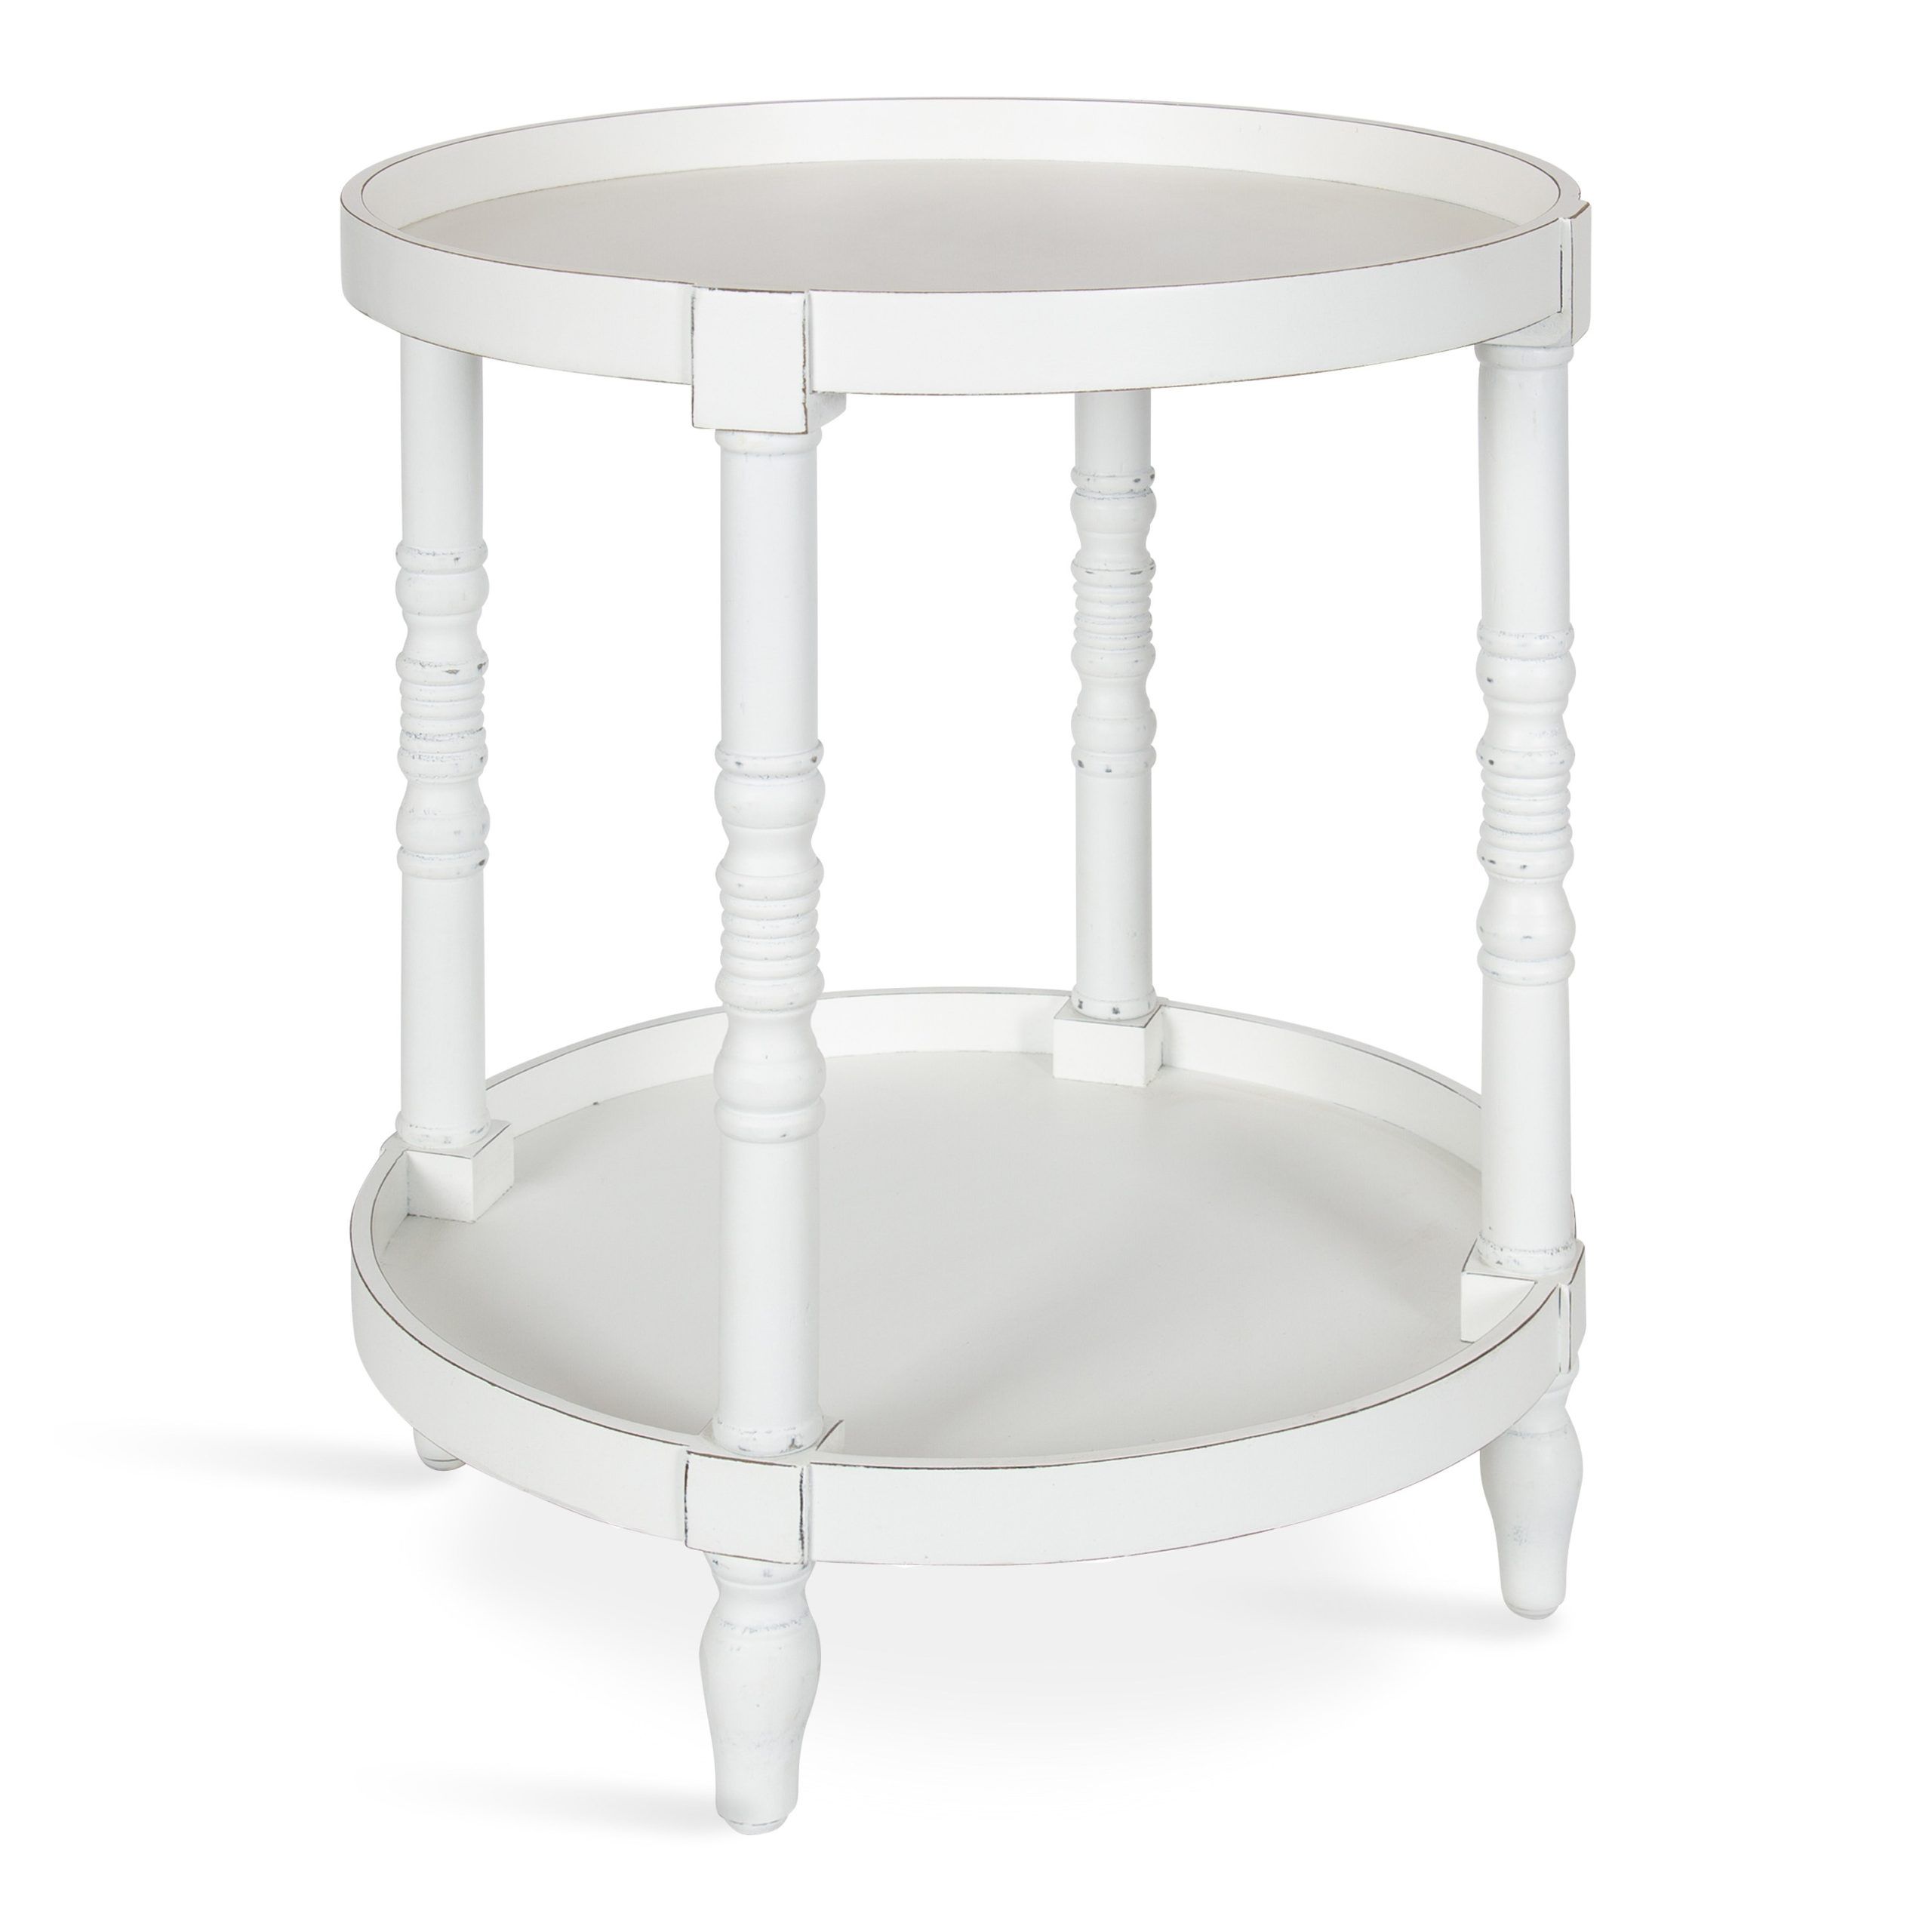 Kate And Laurel Bellport 20 In W X 24 In H White Composite Round Regarding Kate And Laurel Bellport Farmhouse Drink Tables (View 15 of 15)